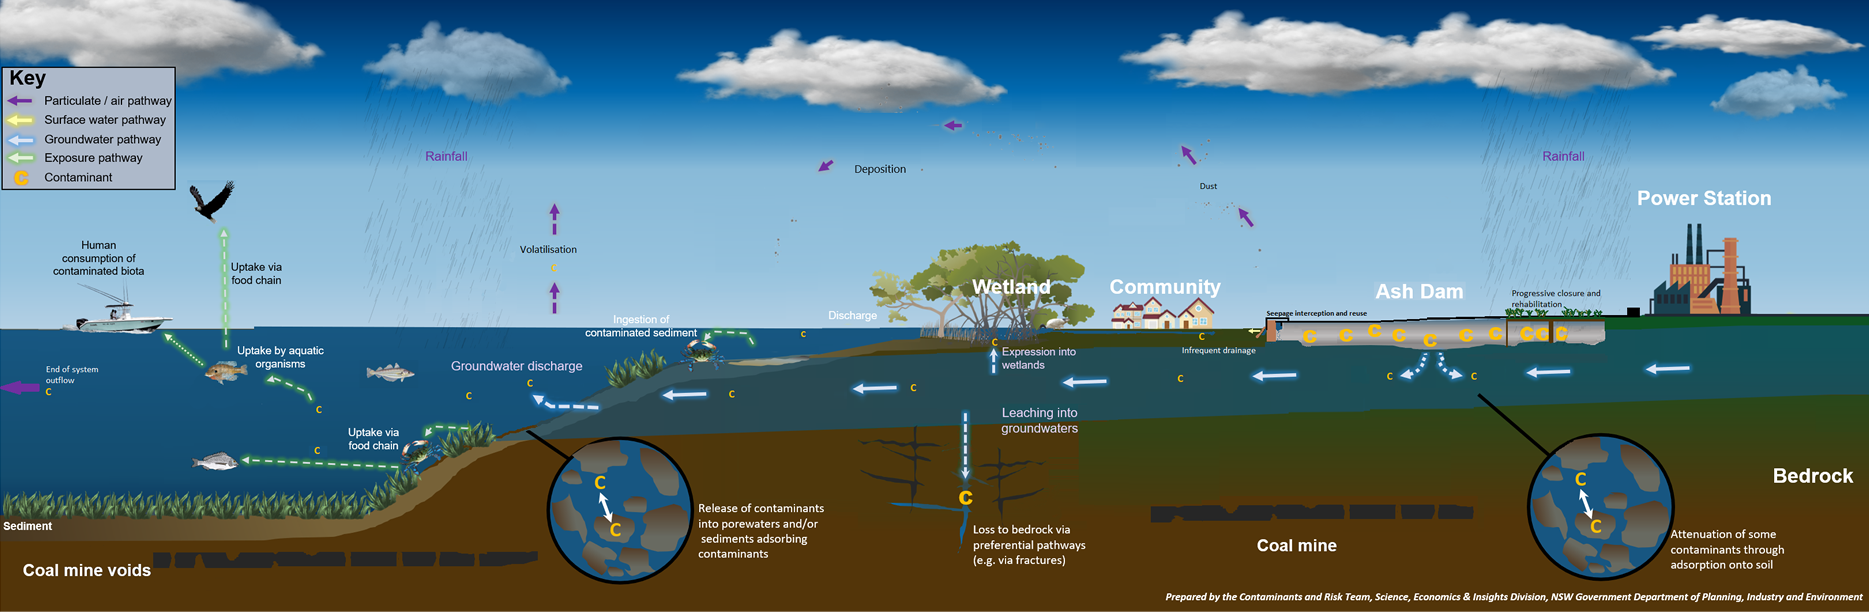 Conceptual diagram showing the key transport pathways, potential impacts, and management responses associated with coal ash repositories.